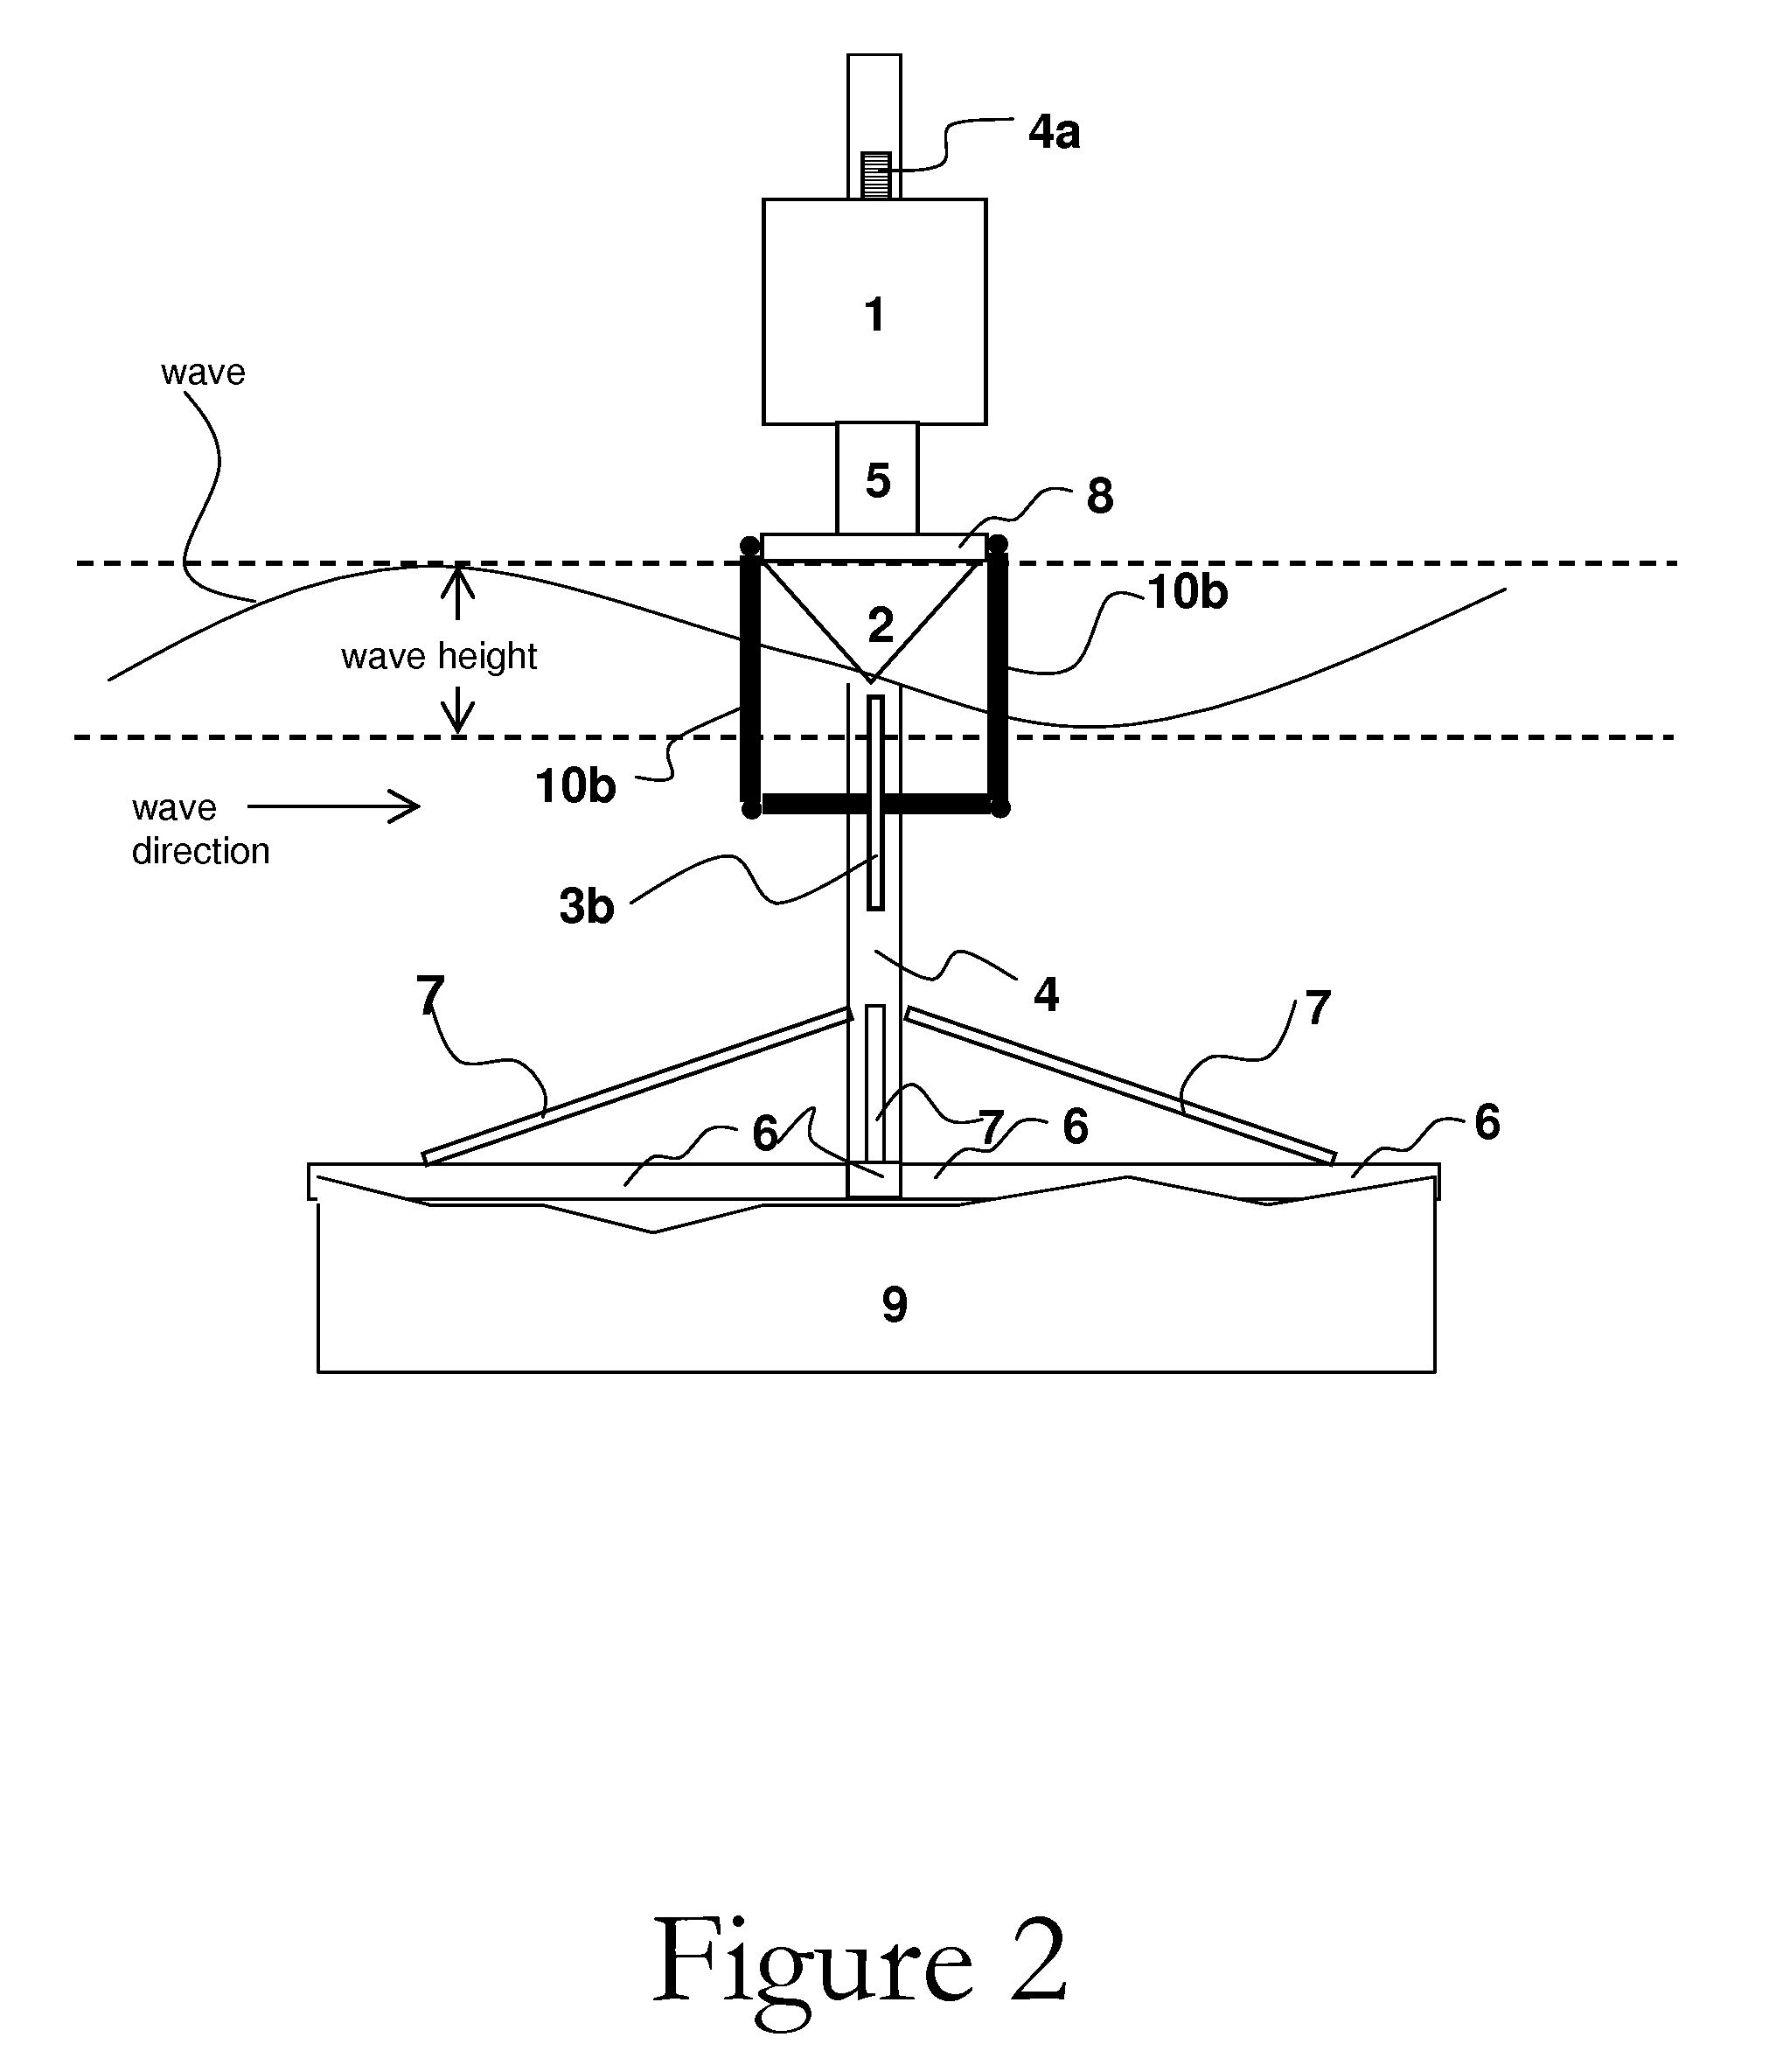 Wave-power system for extracting simultaneously both potential and kinetic energy at variable significant wave heights and periods